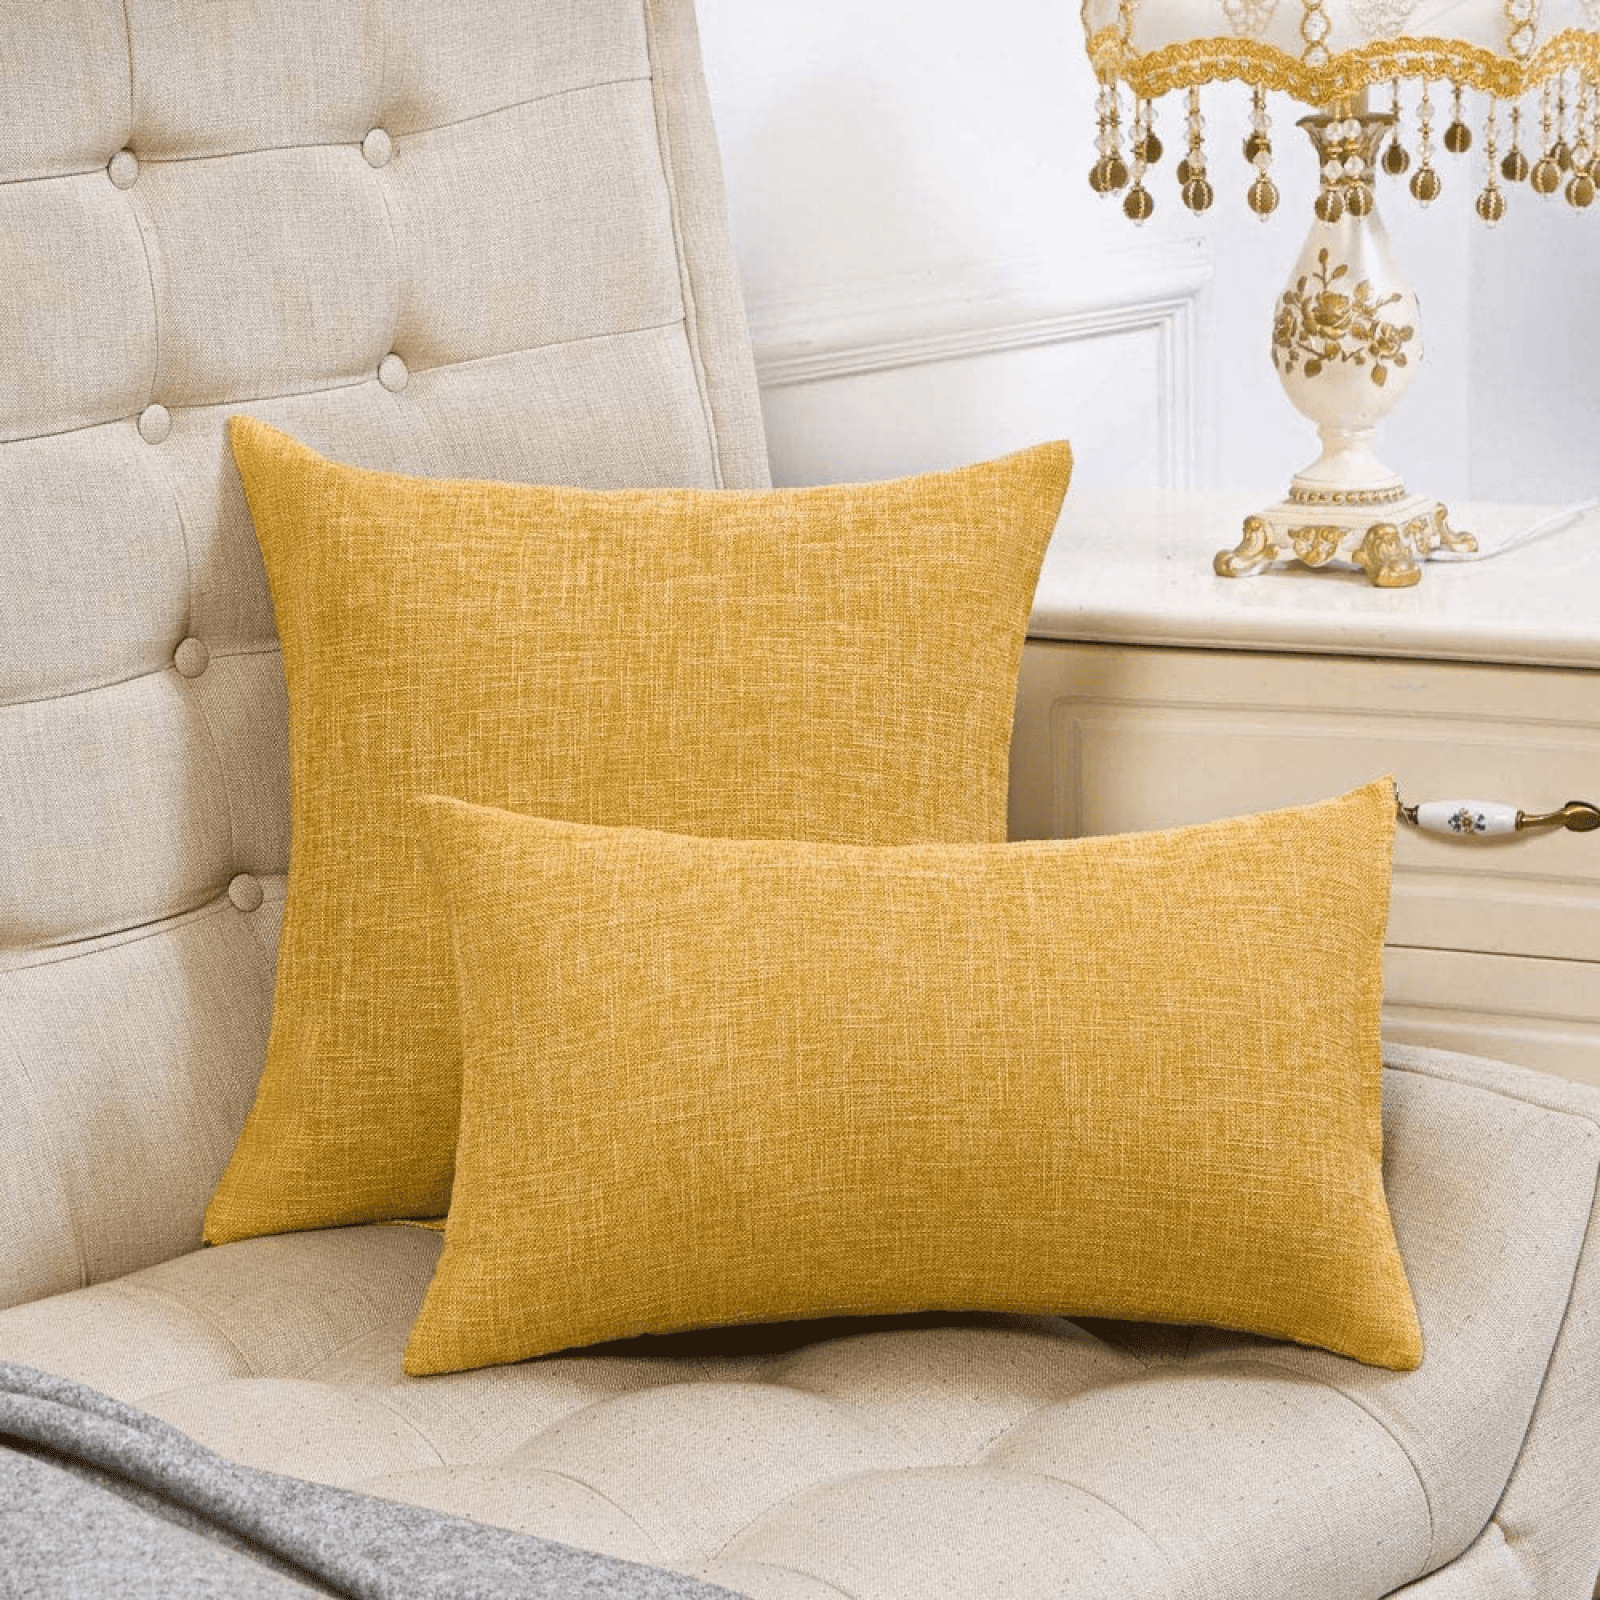 BeBen Fall Pack of 2 Mustard Yellow Velvet Throw Pillow Covers 18 x 18 inch  Couch Pillow Cases Super Soft Decorative Pillow Covers for Sofa Bedroom